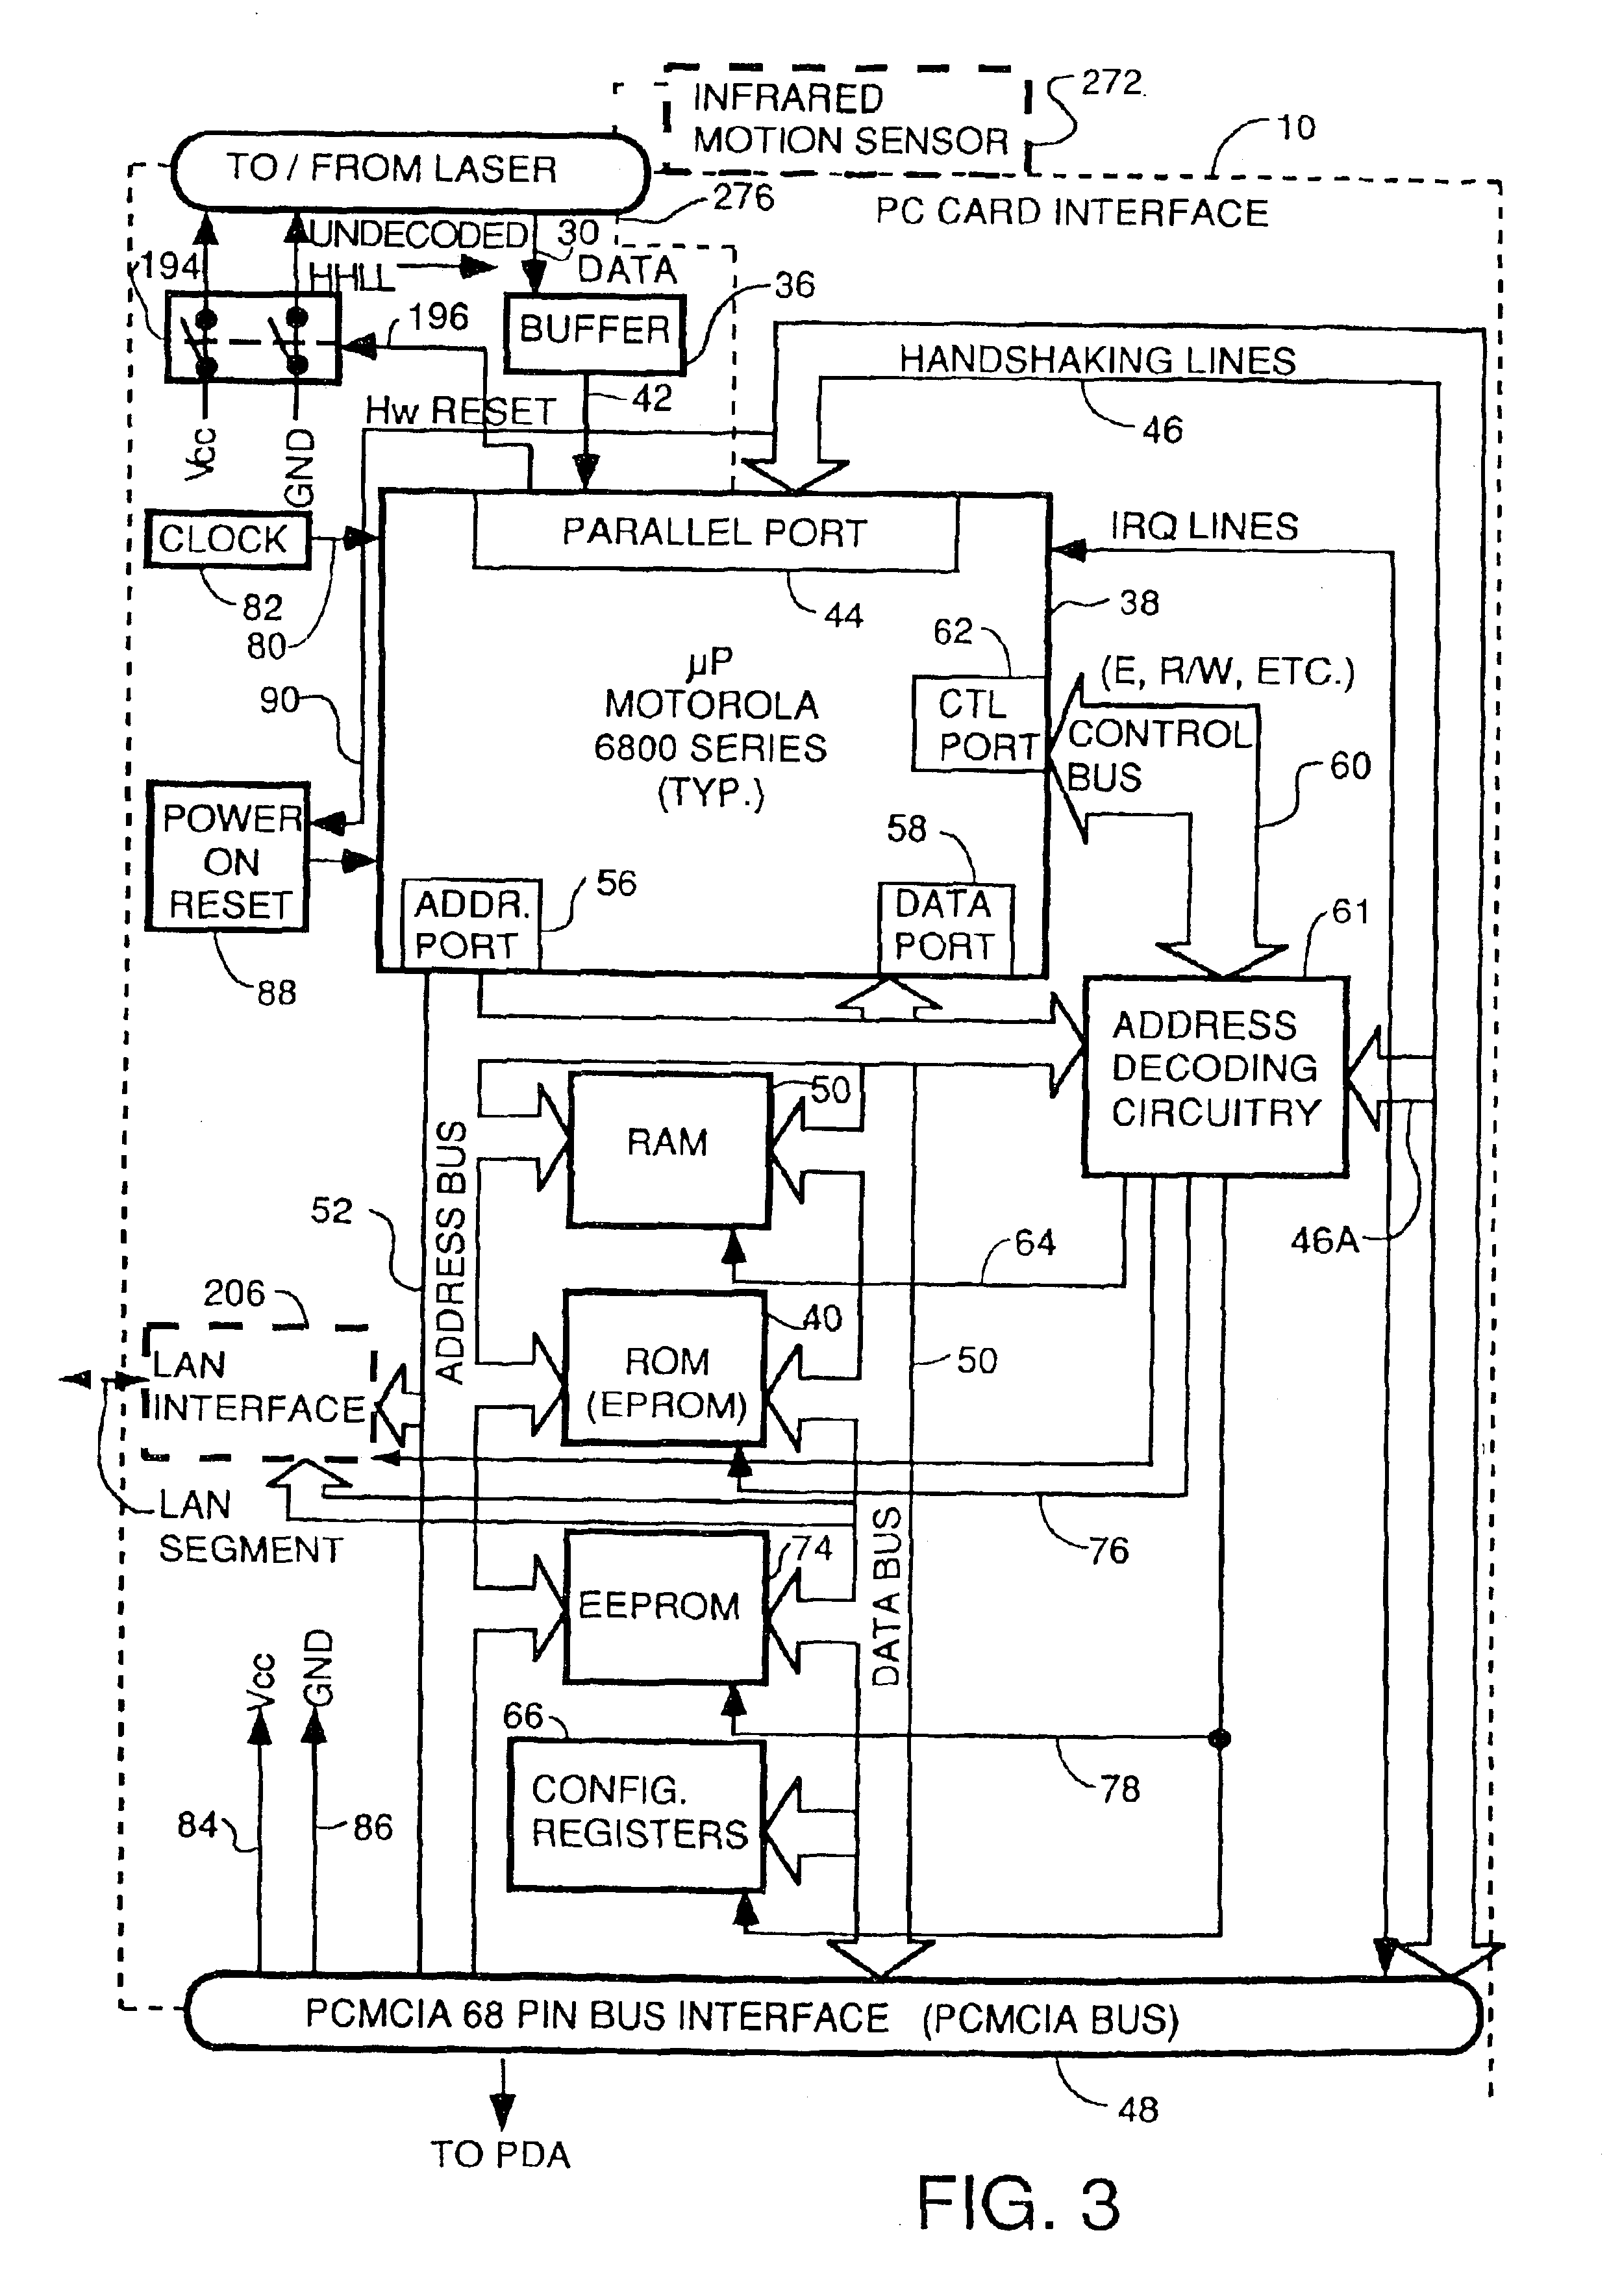 PCMCIA interface card for coupling input devices such as barcode scanning engines to personal digital assistants and palmtop computers